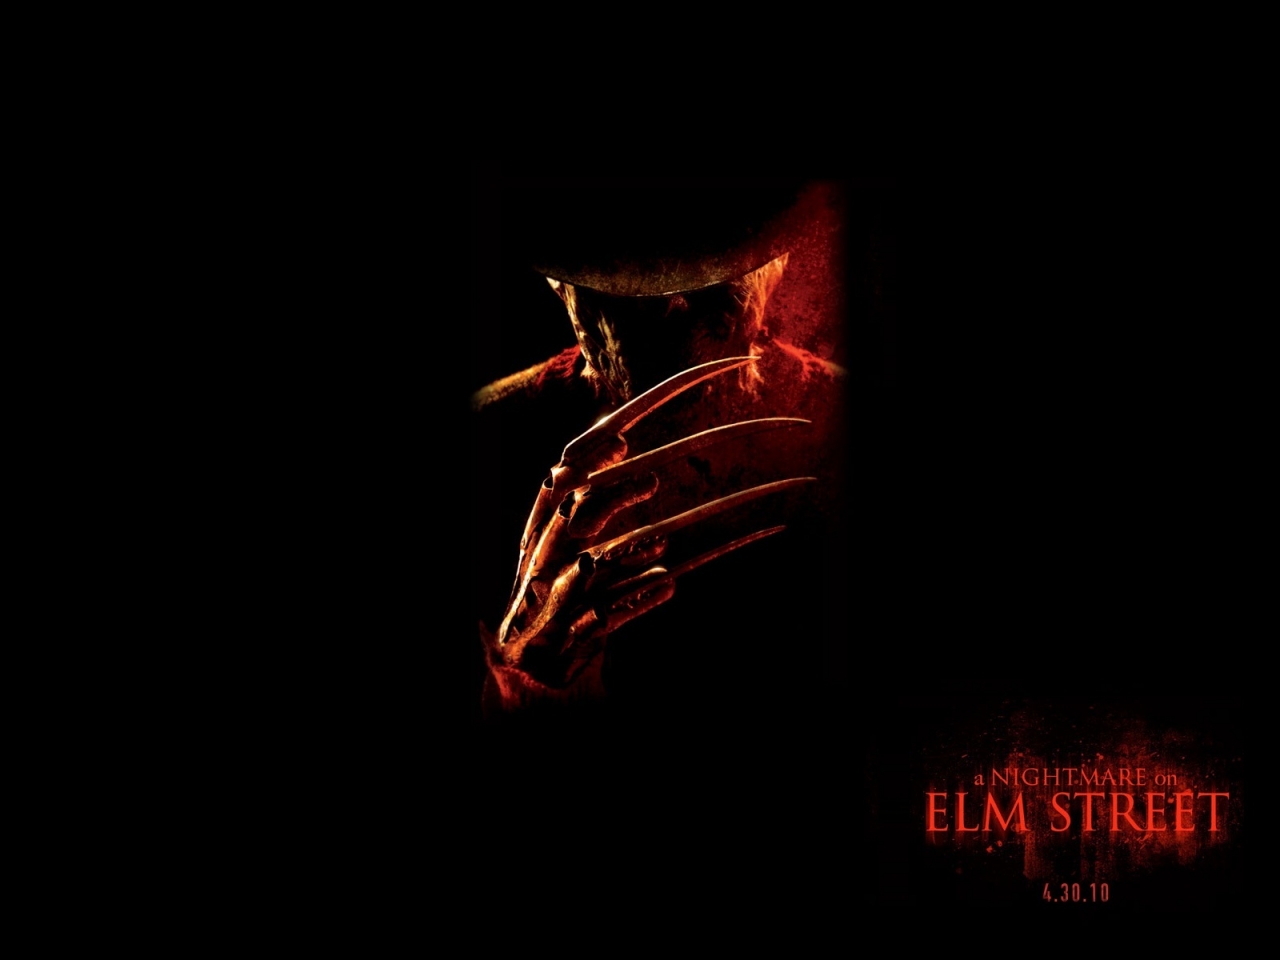 A Nightmare on Elm Street 2010 for 1280 x 960 resolution